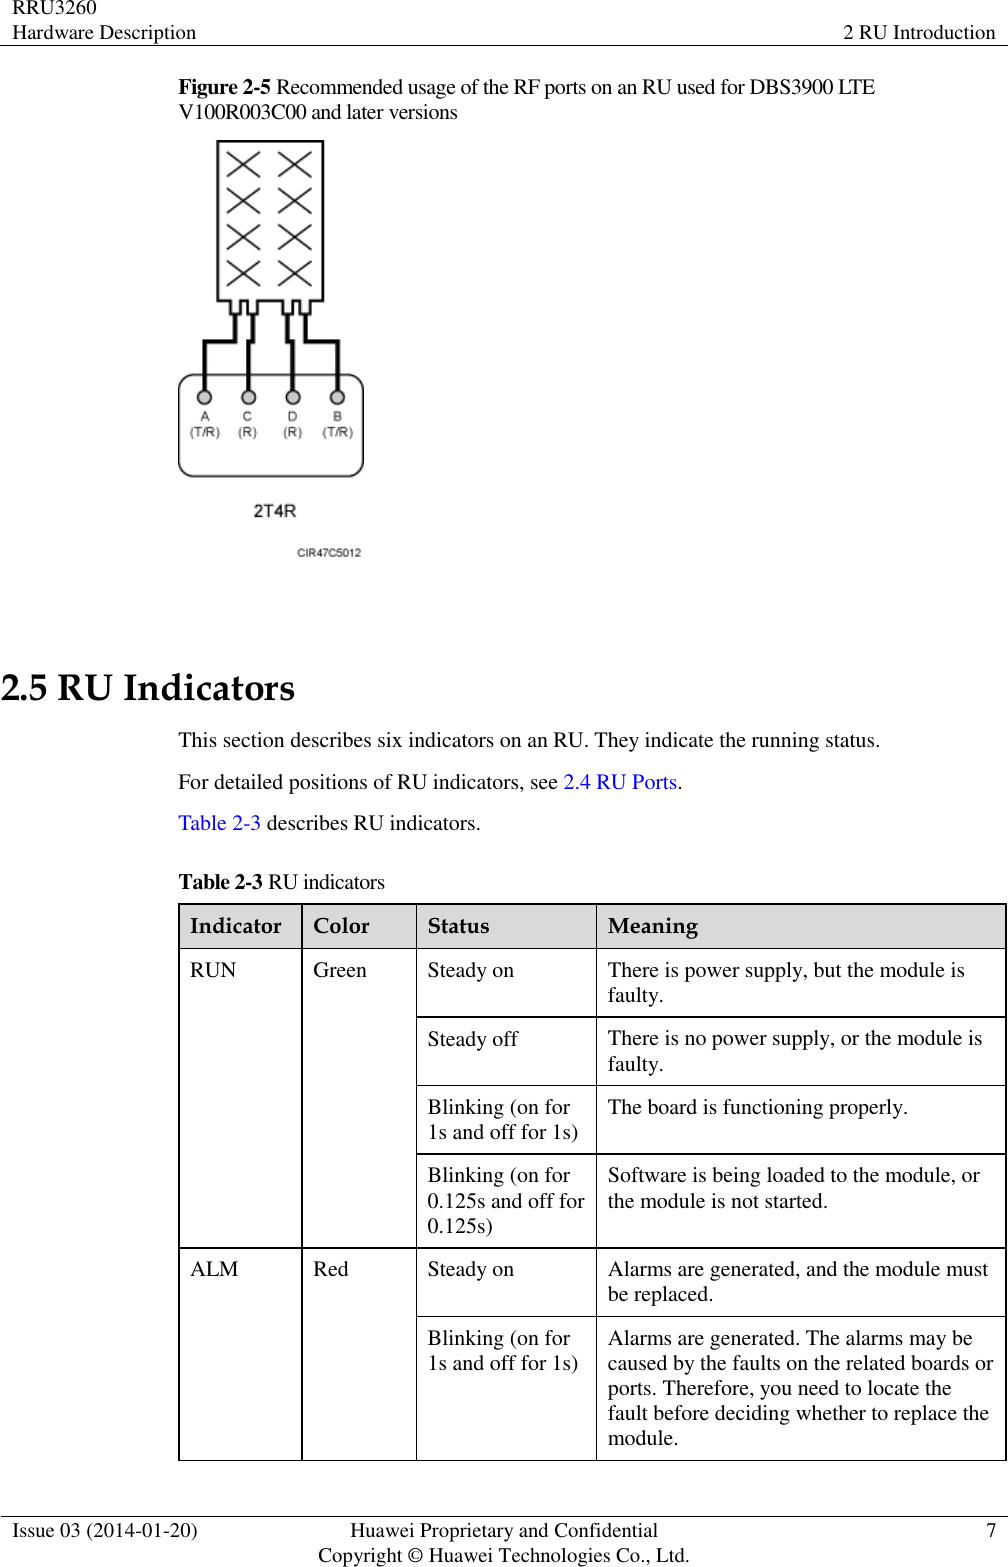 RRU3260 Hardware Description 2 RU Introduction  Issue 03 (2014-01-20) Huawei Proprietary and Confidential                                     Copyright © Huawei Technologies Co., Ltd. 7  Figure 2-5 Recommended usage of the RF ports on an RU used for DBS3900 LTE V100R003C00 and later versions   2.5 RU Indicators This section describes six indicators on an RU. They indicate the running status.   For detailed positions of RU indicators, see 2.4 RU Ports. Table 2-3 describes RU indicators. Table 2-3 RU indicators Indicator Color Status Meaning RUN Green Steady on There is power supply, but the module is faulty. Steady off There is no power supply, or the module is faulty. Blinking (on for 1s and off for 1s) The board is functioning properly. Blinking (on for 0.125s and off for 0.125s) Software is being loaded to the module, or the module is not started. ALM Red Steady on Alarms are generated, and the module must be replaced. Blinking (on for 1s and off for 1s) Alarms are generated. The alarms may be caused by the faults on the related boards or ports. Therefore, you need to locate the fault before deciding whether to replace the module. 